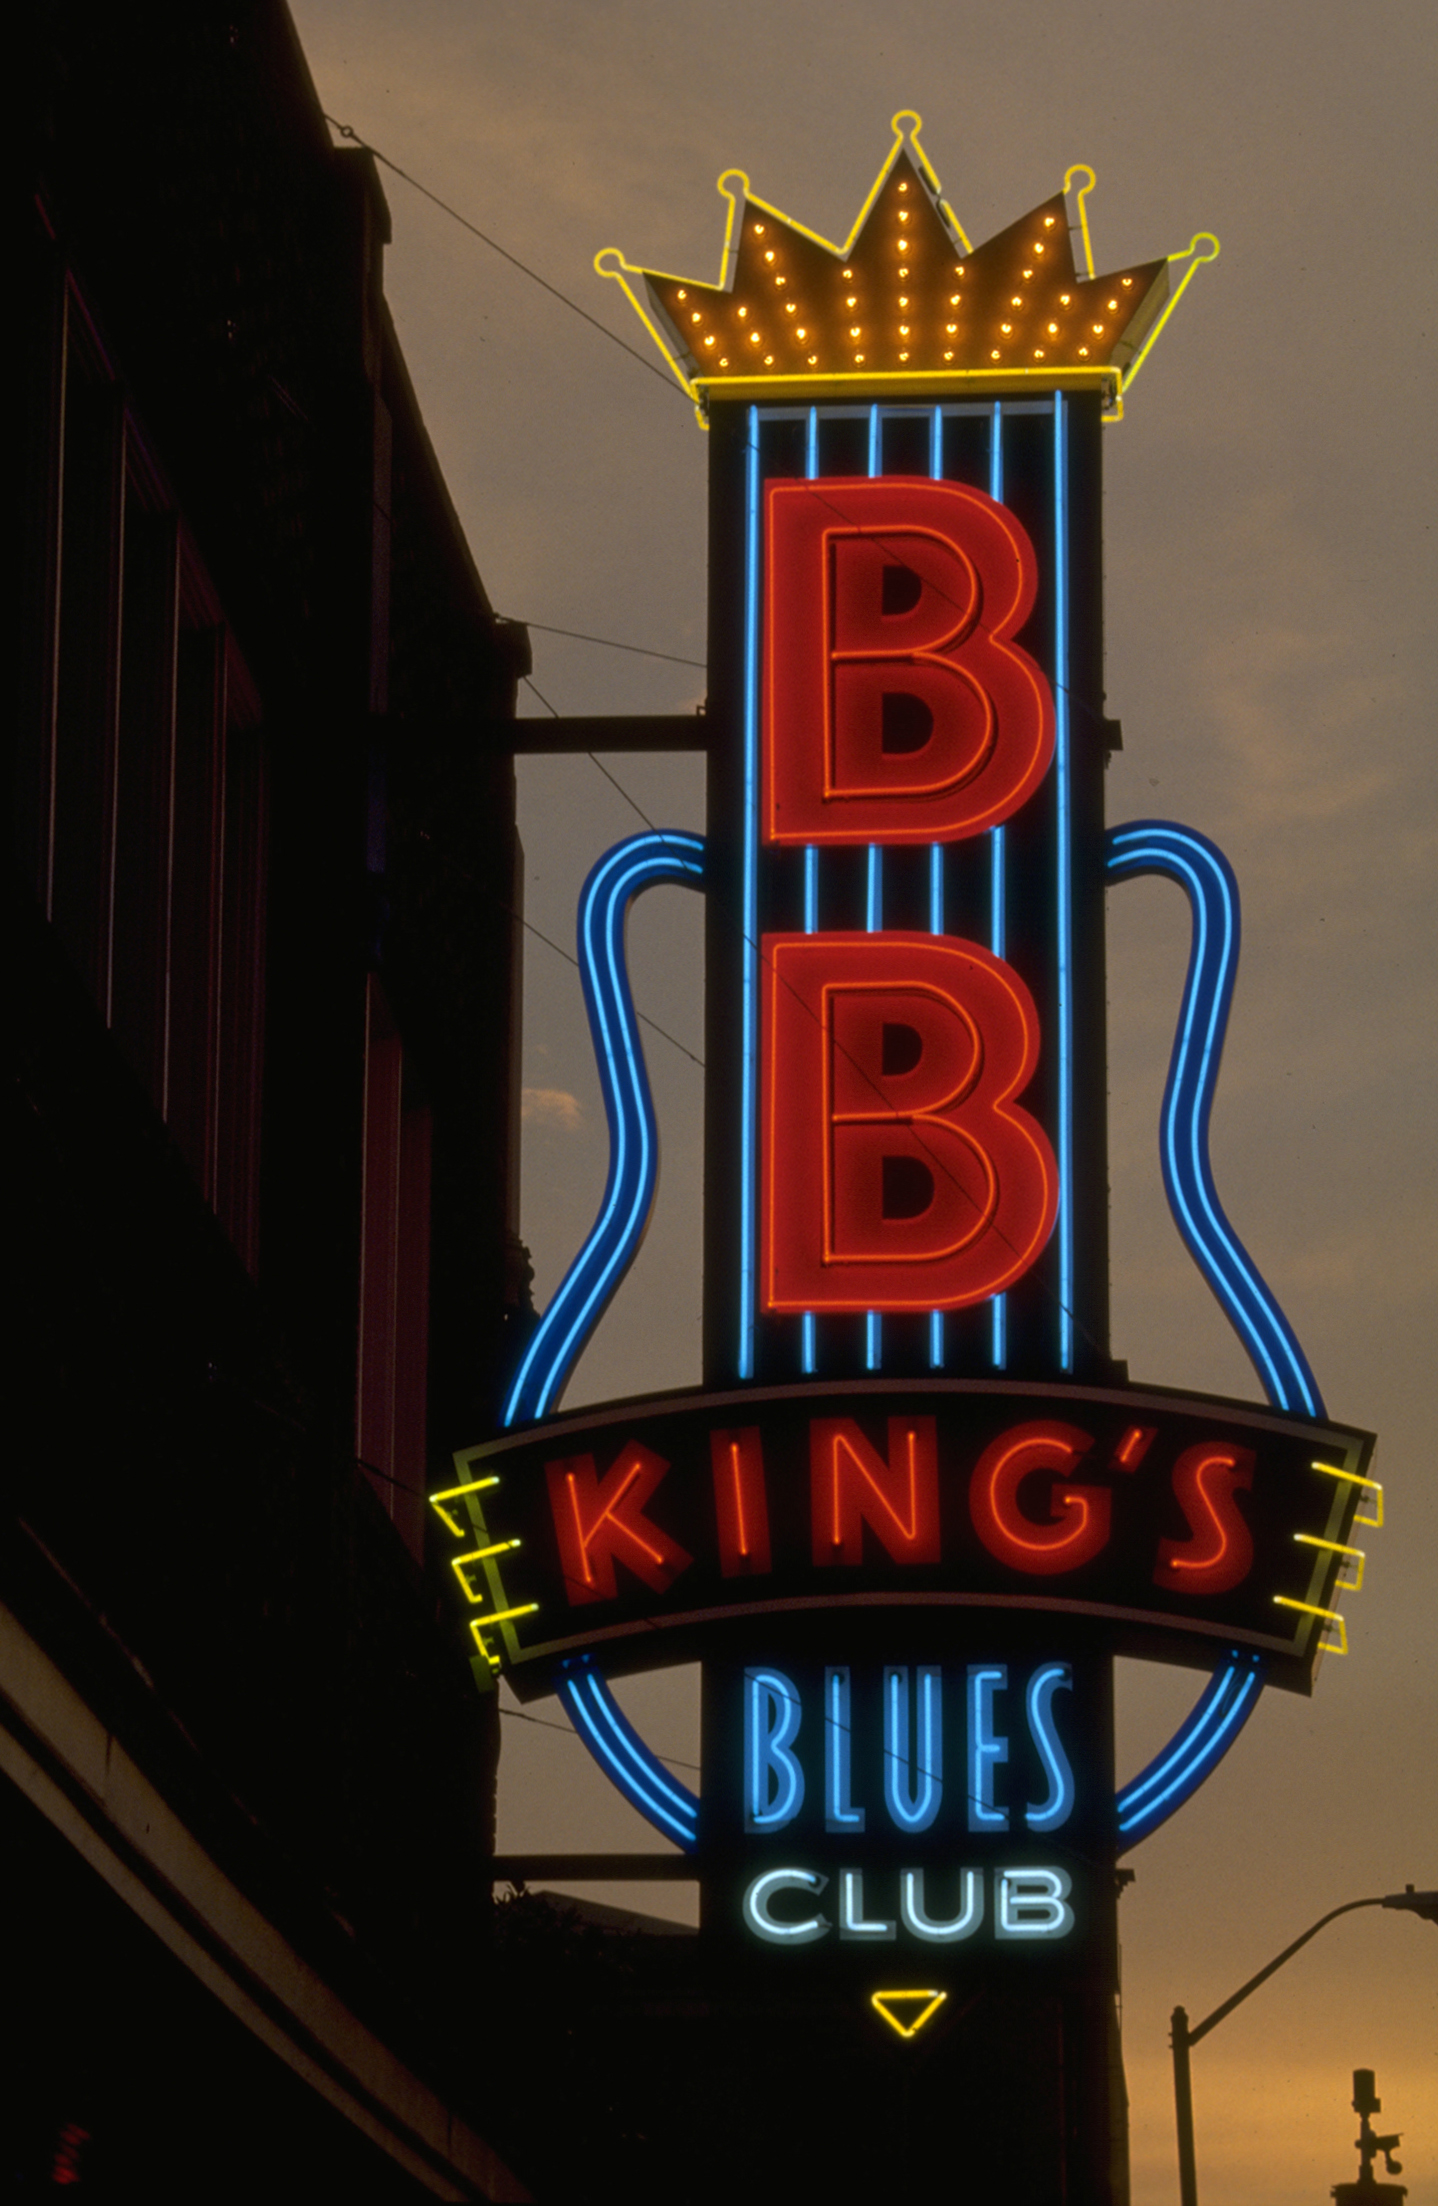  BB King’s Blues Club exterior signage as seen on Bluff City Law  Branding creative and design by Chuck Mitchell  Beale Street Memphis, TN  Sign fabrication and installation by Frank Balton Sign Company 